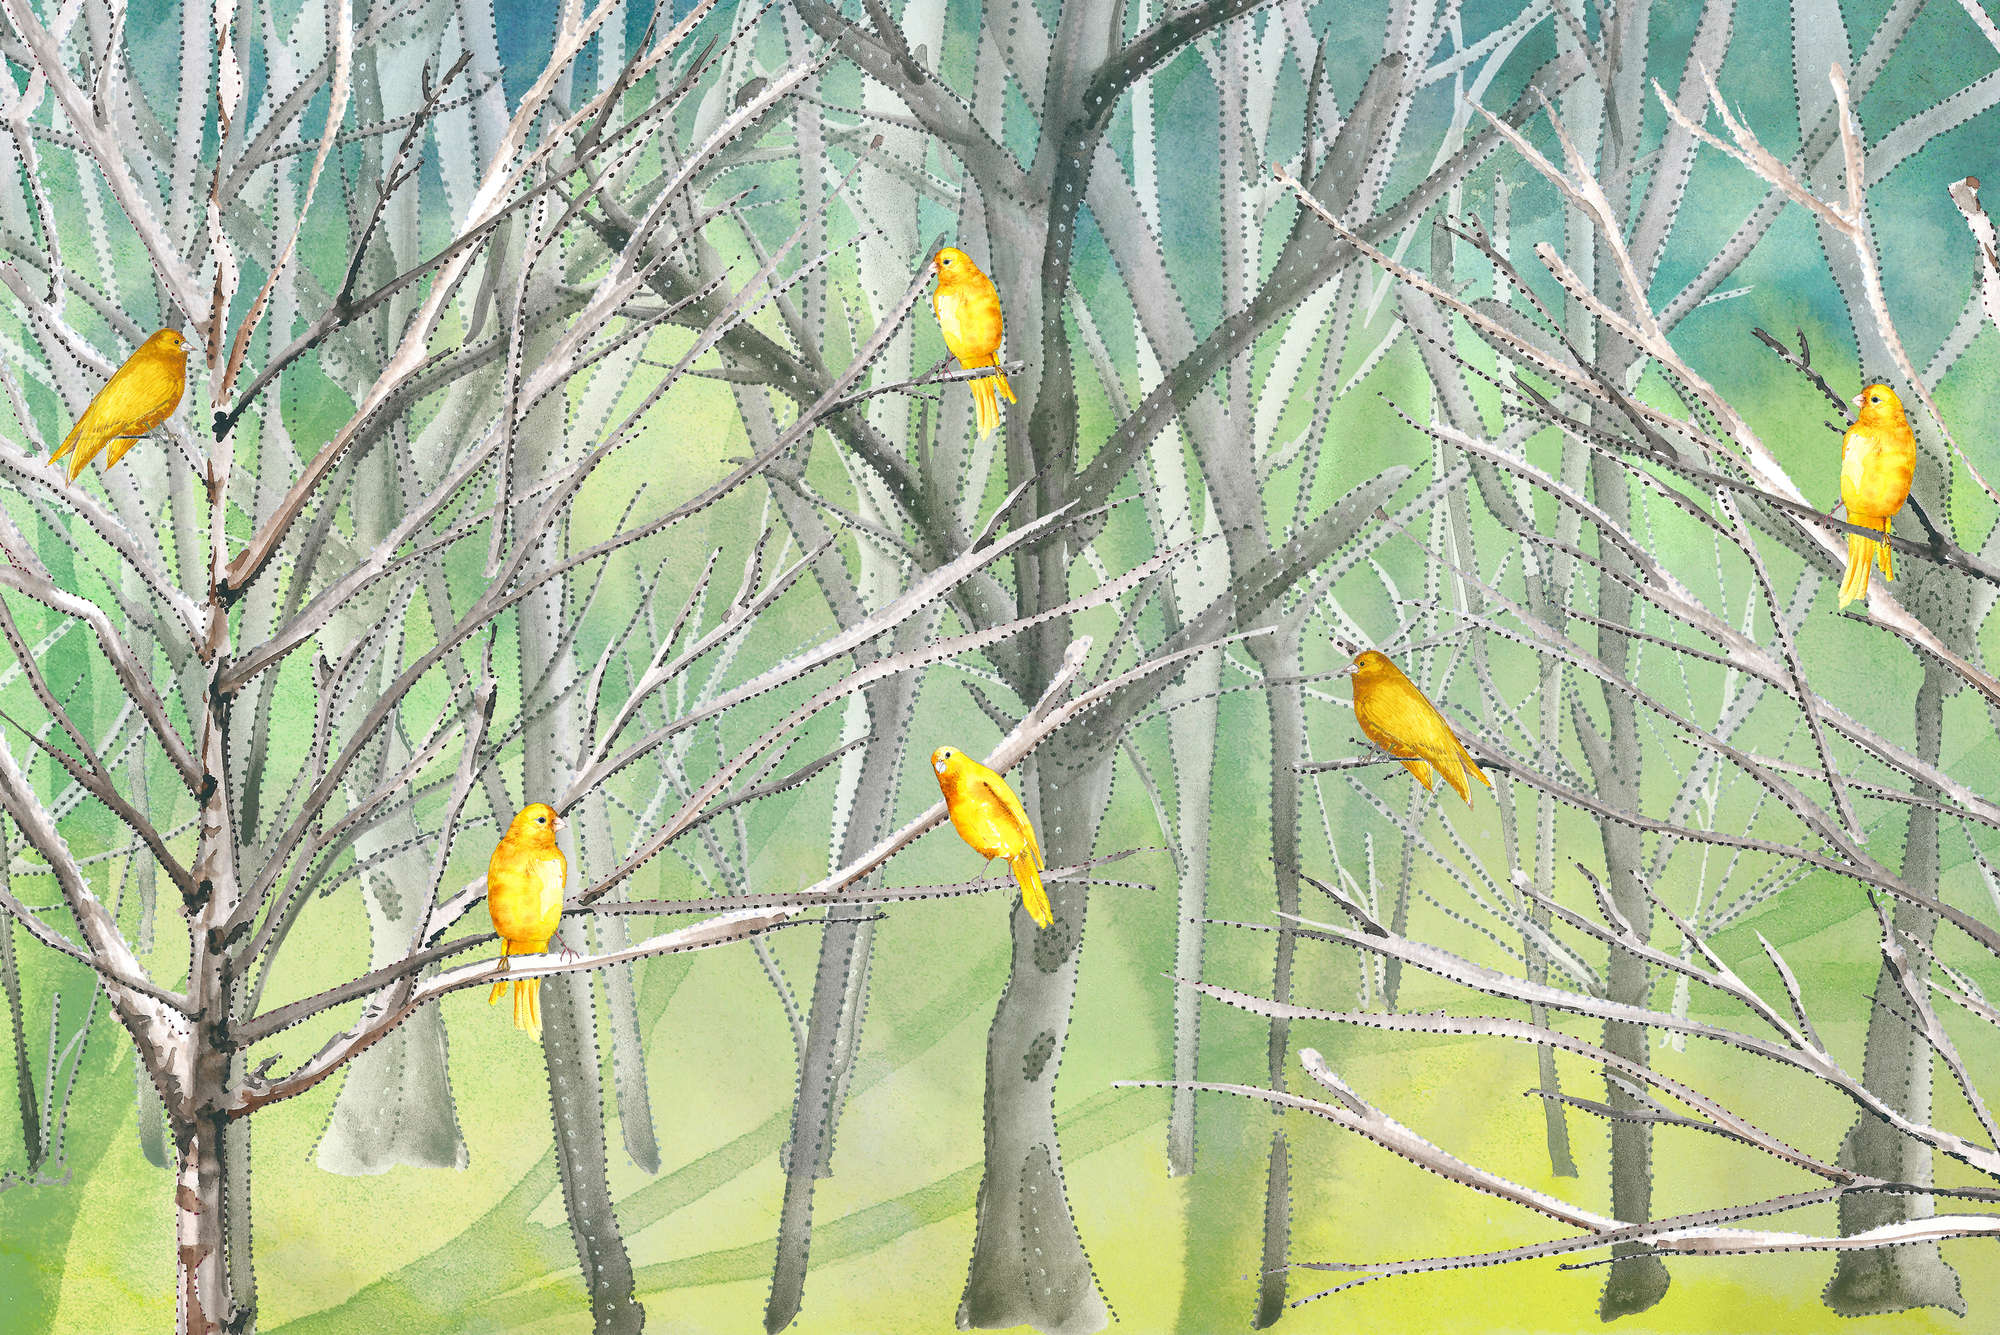             Forest mural with birds in blue and yellow on textured nonwoven
        